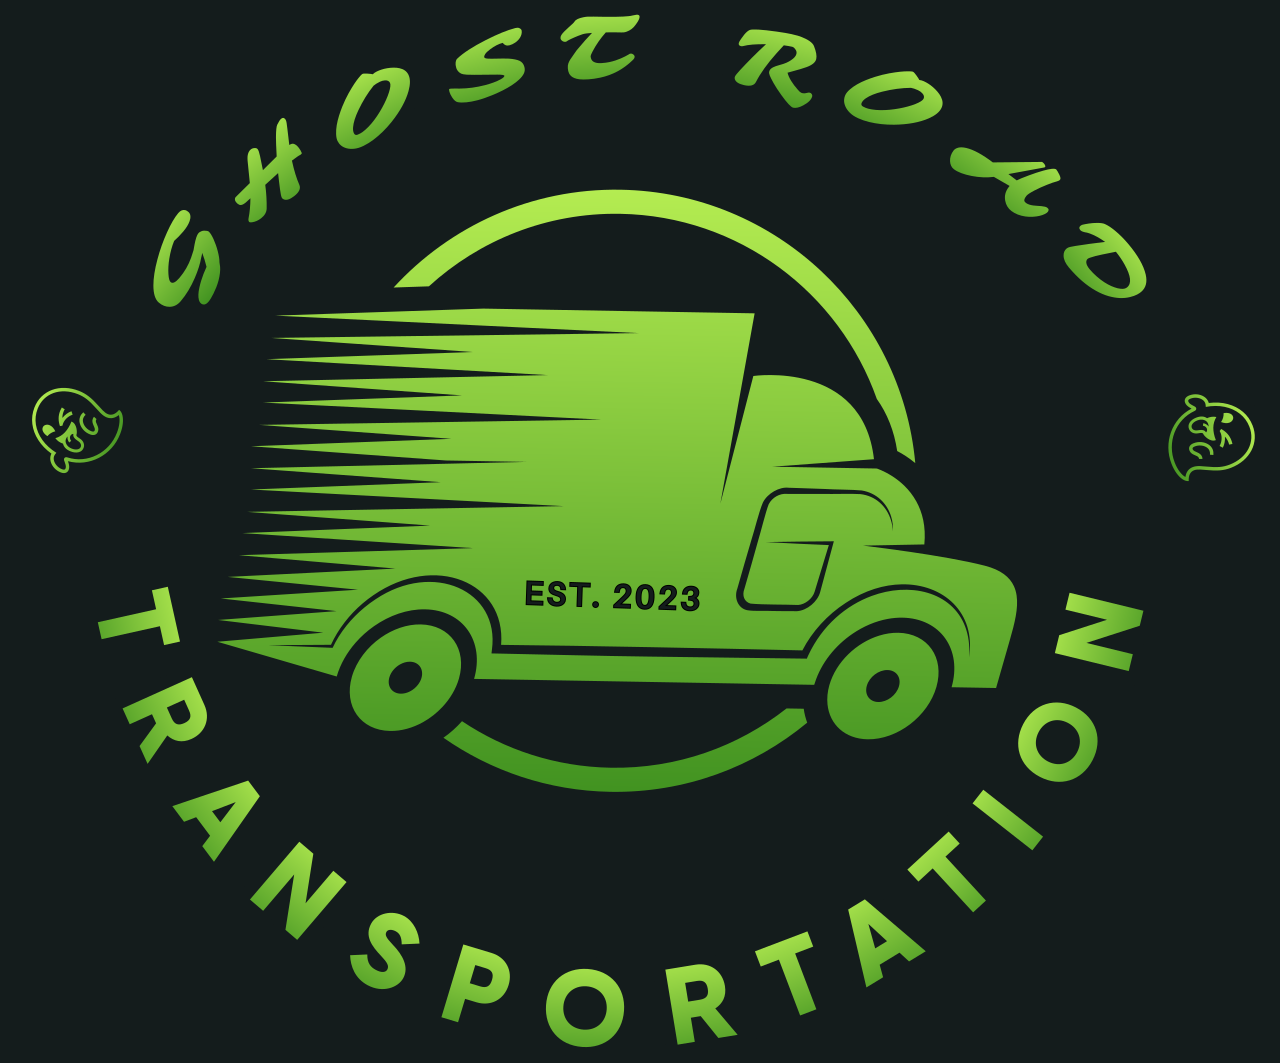 GHOST ROAD Transportation's web page